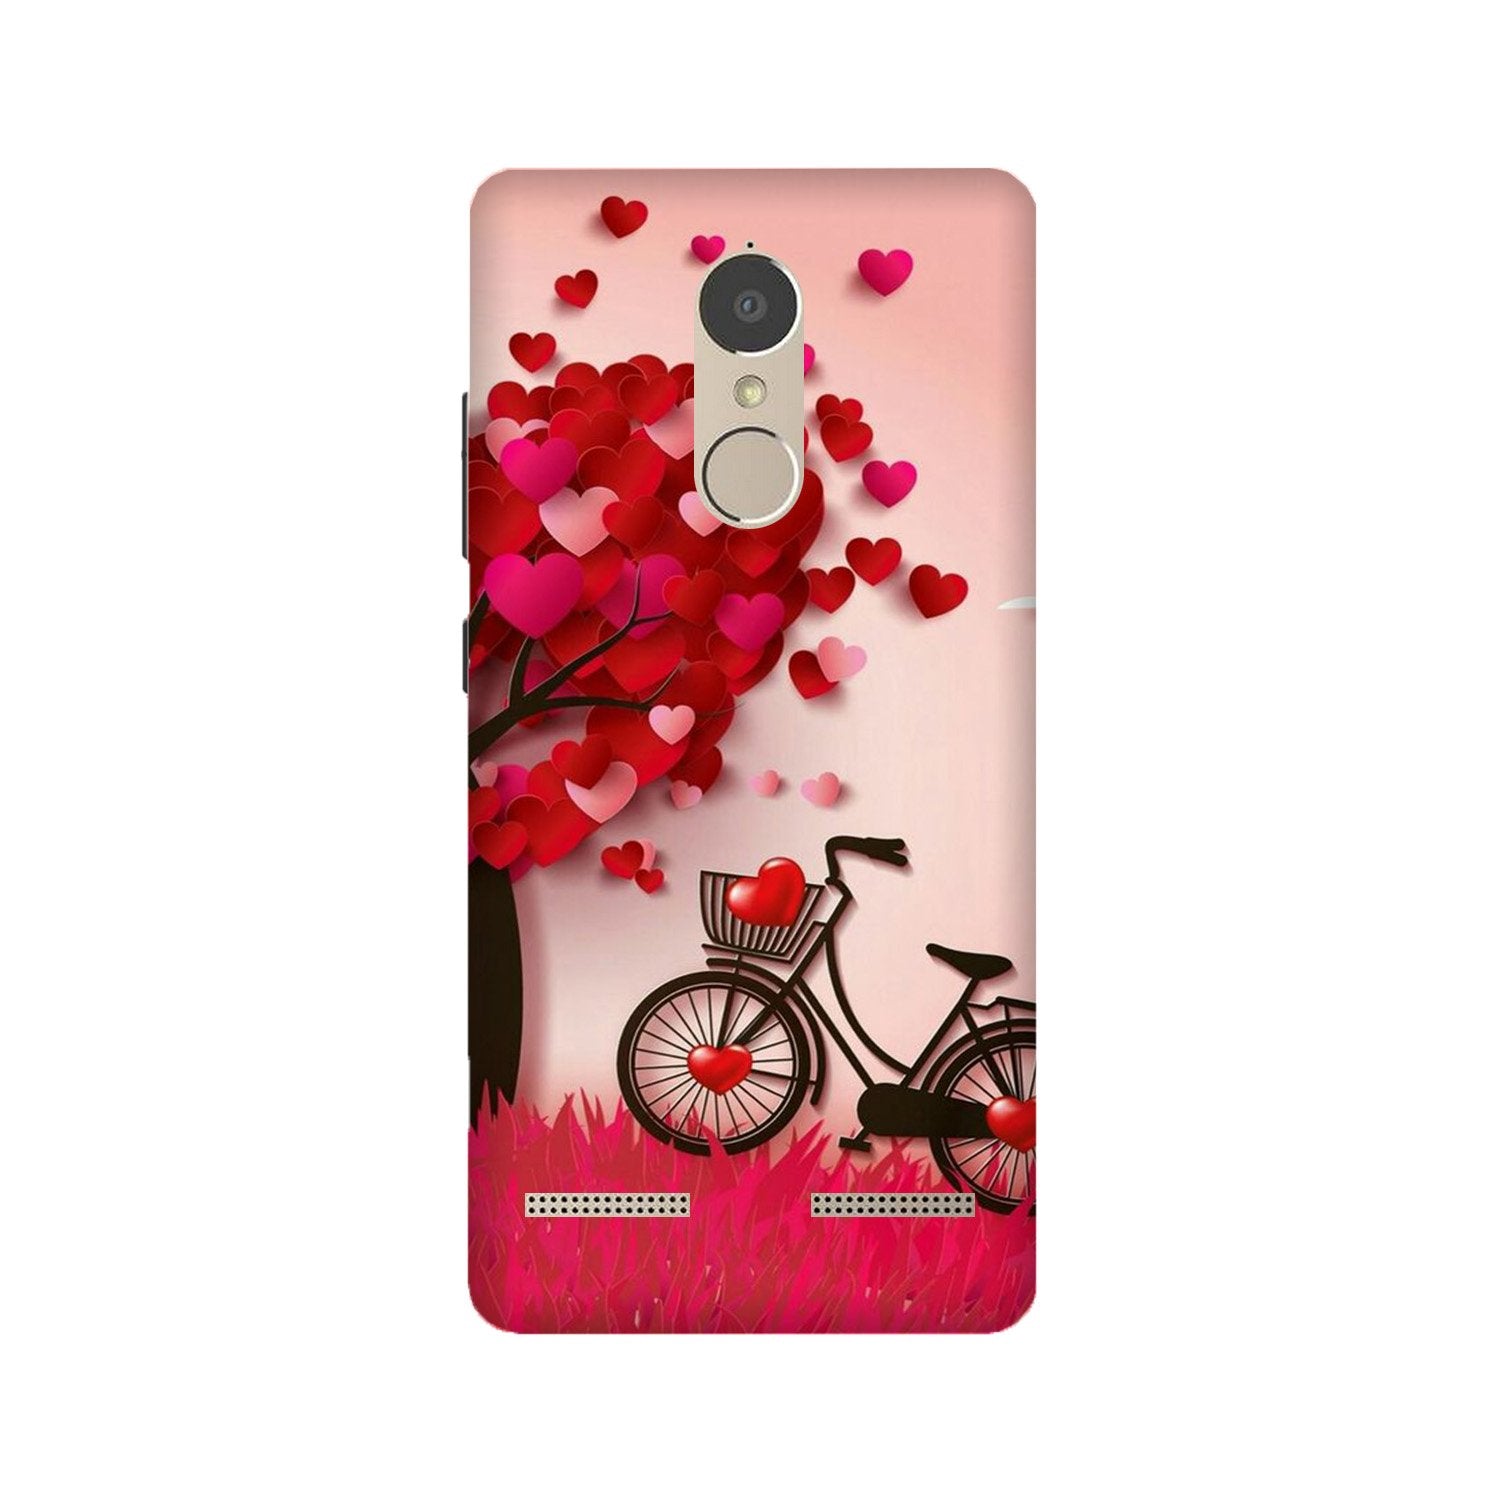 Red Heart Cycle Case for Lenovo K6 / K6 Power (Design No. 222)